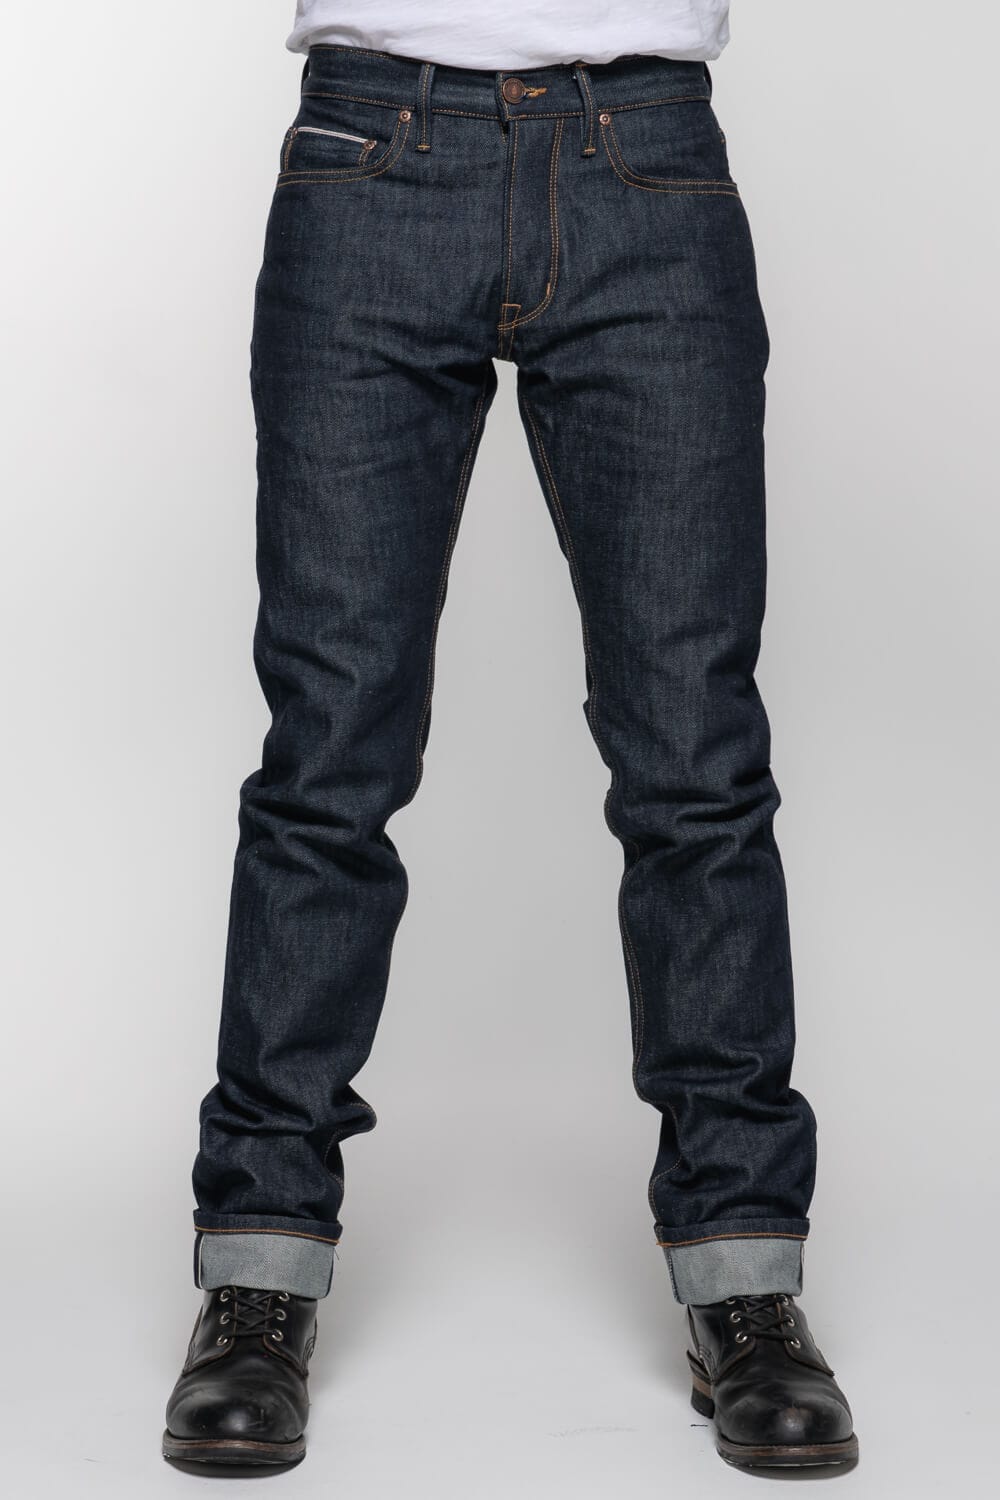 Levi's, Lee, Wrangler, and More Popular Jeans Start at Just $14 at